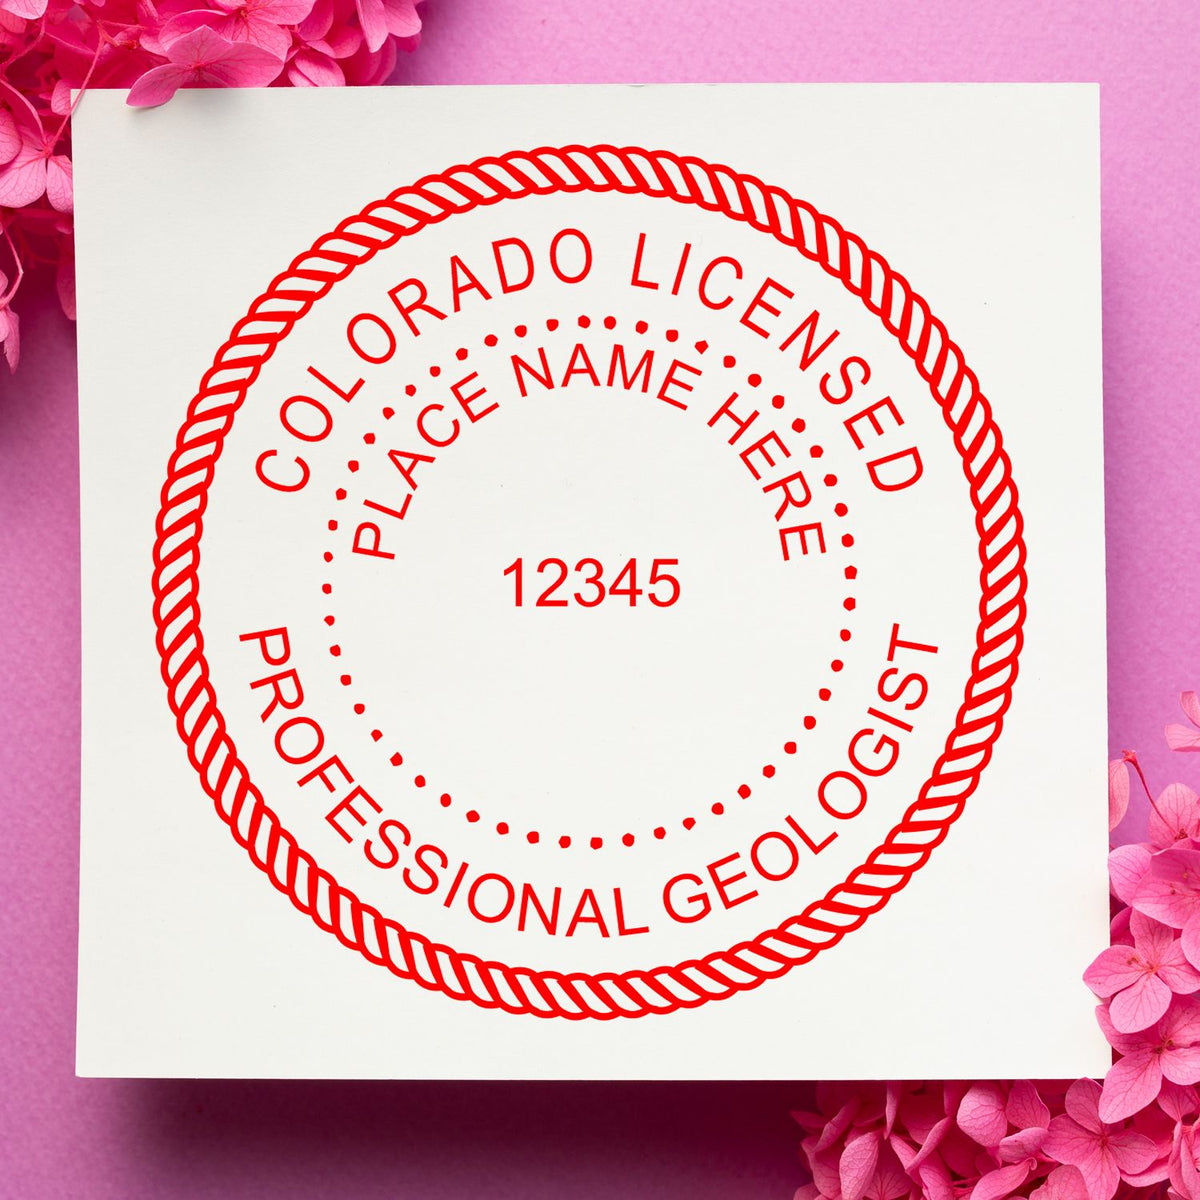 A lifestyle photo showing a stamped image of the Colorado Professional Geologist Seal Stamp on a piece of paper